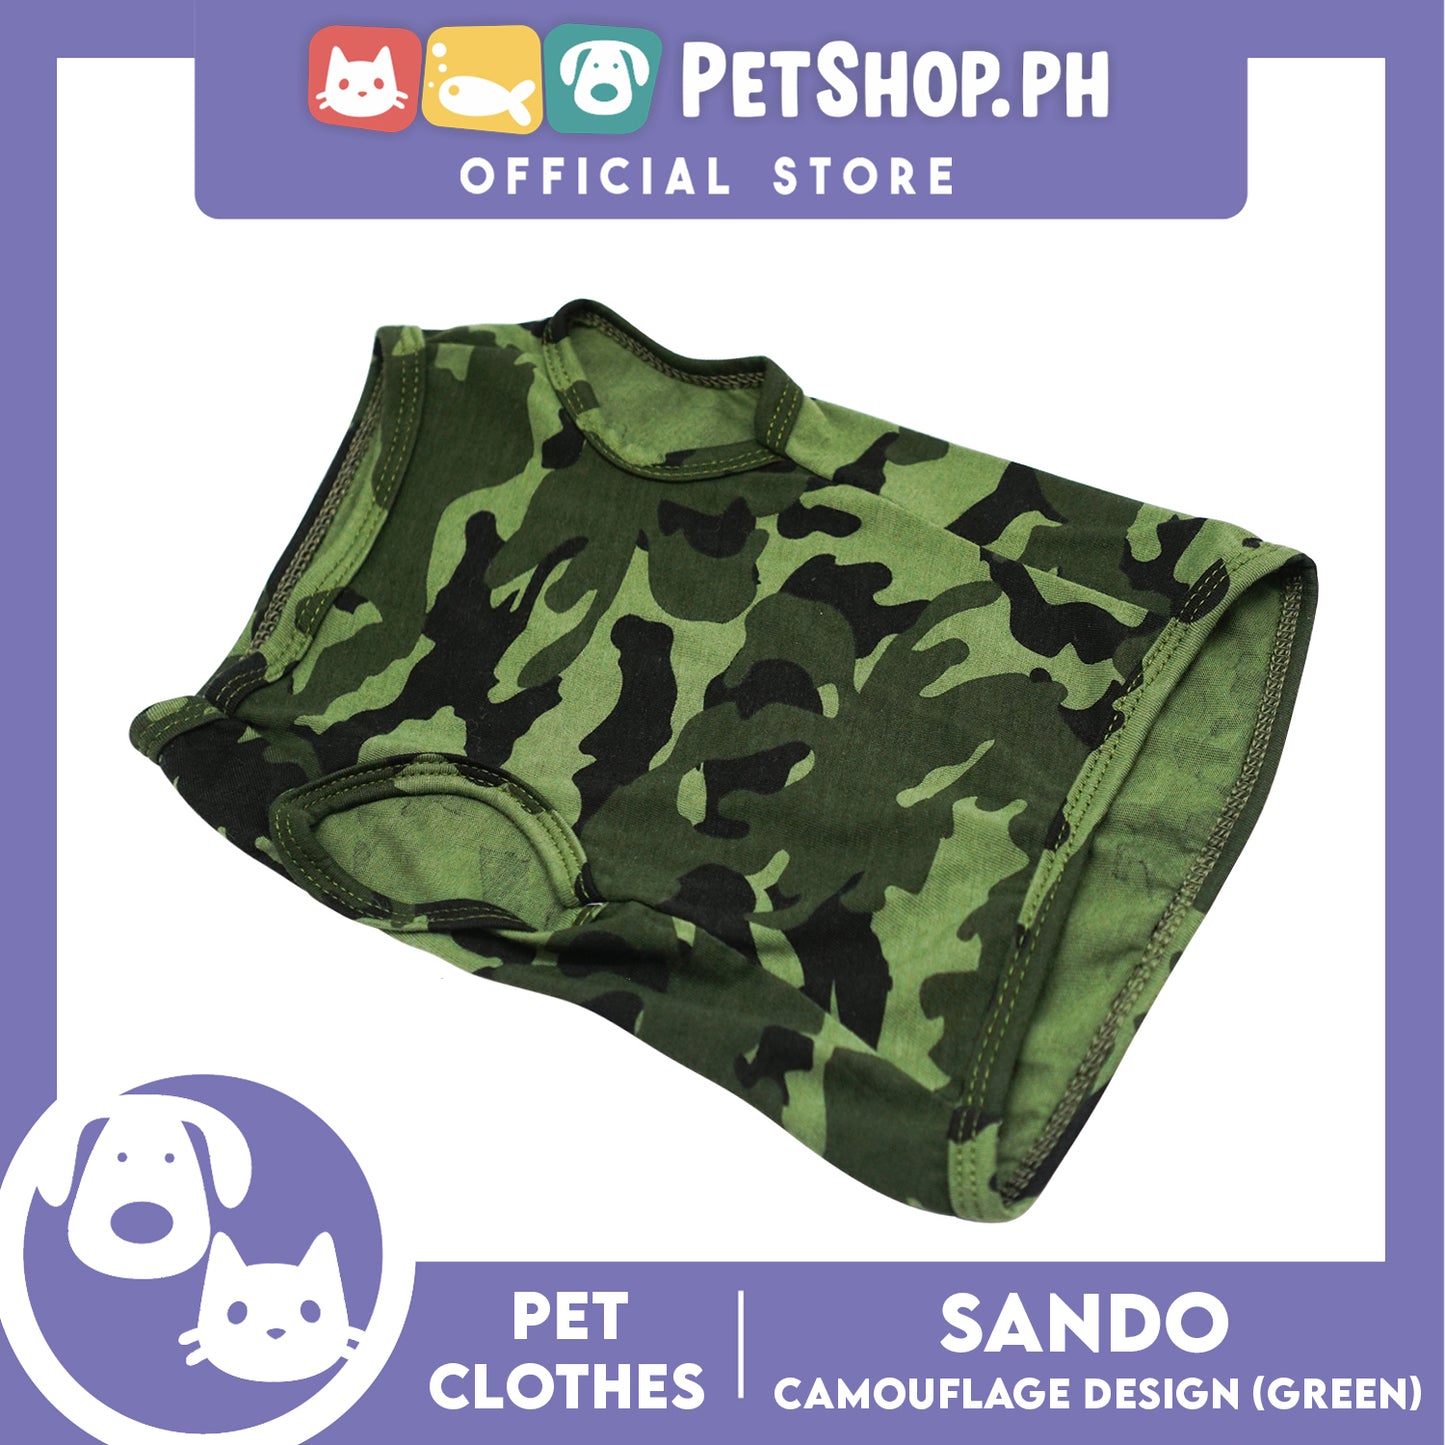 Pet Shirt Green Camouflage Design Sleeveless (Medium) for Puppy, Small Dogs and Cats